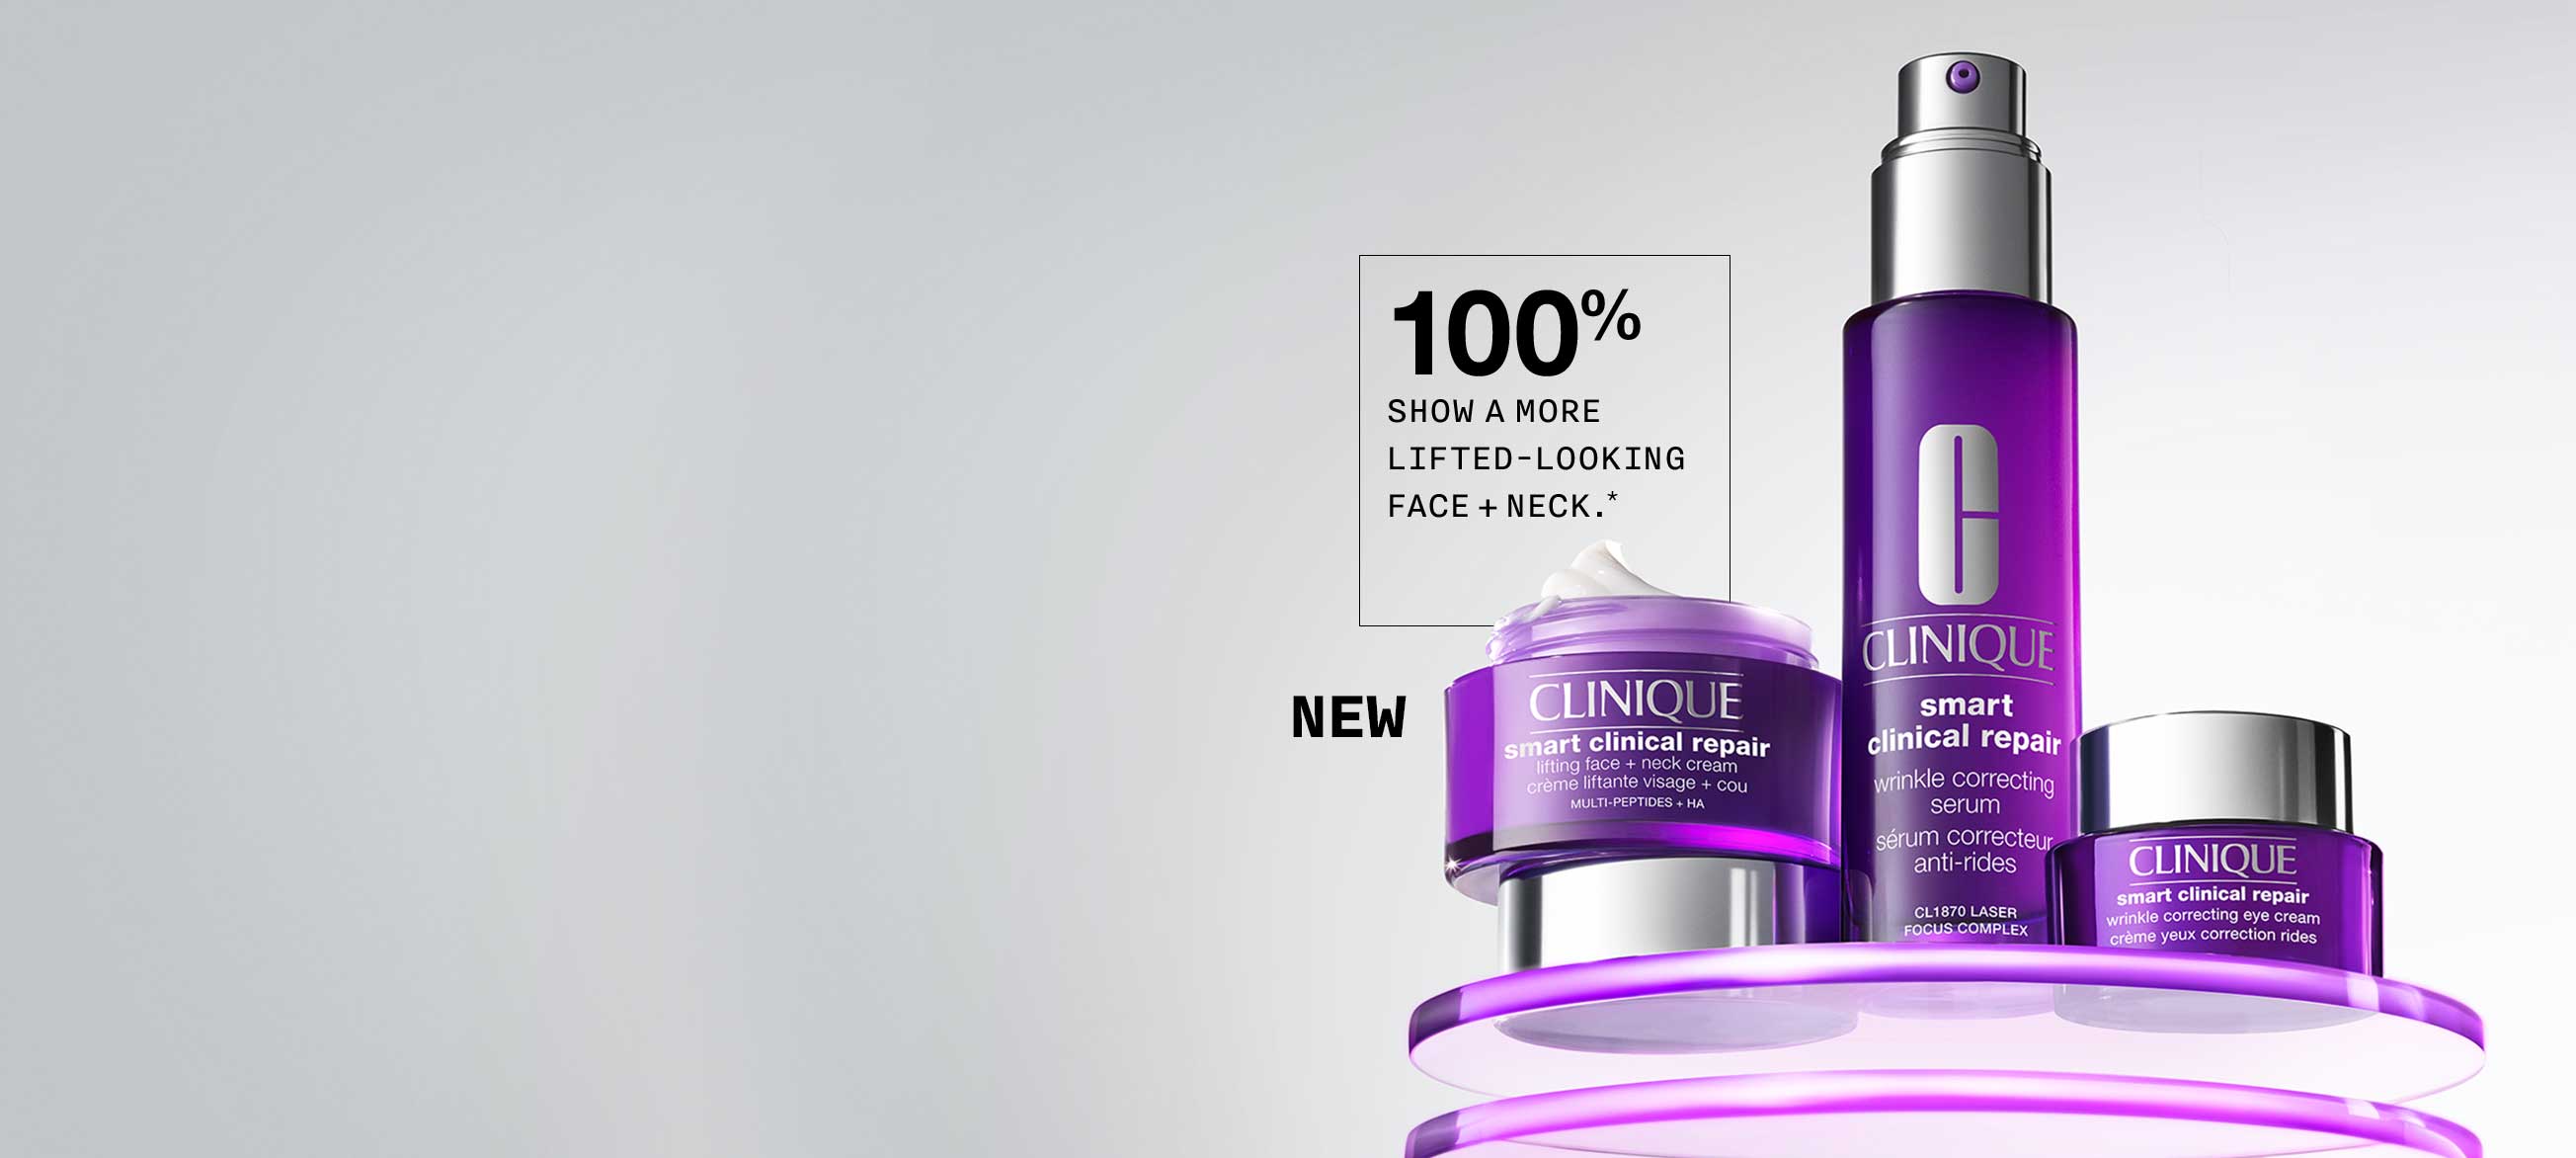 NEW. 100% SHOW A MORE LIFTED-LOOKING FACE + NECK.*